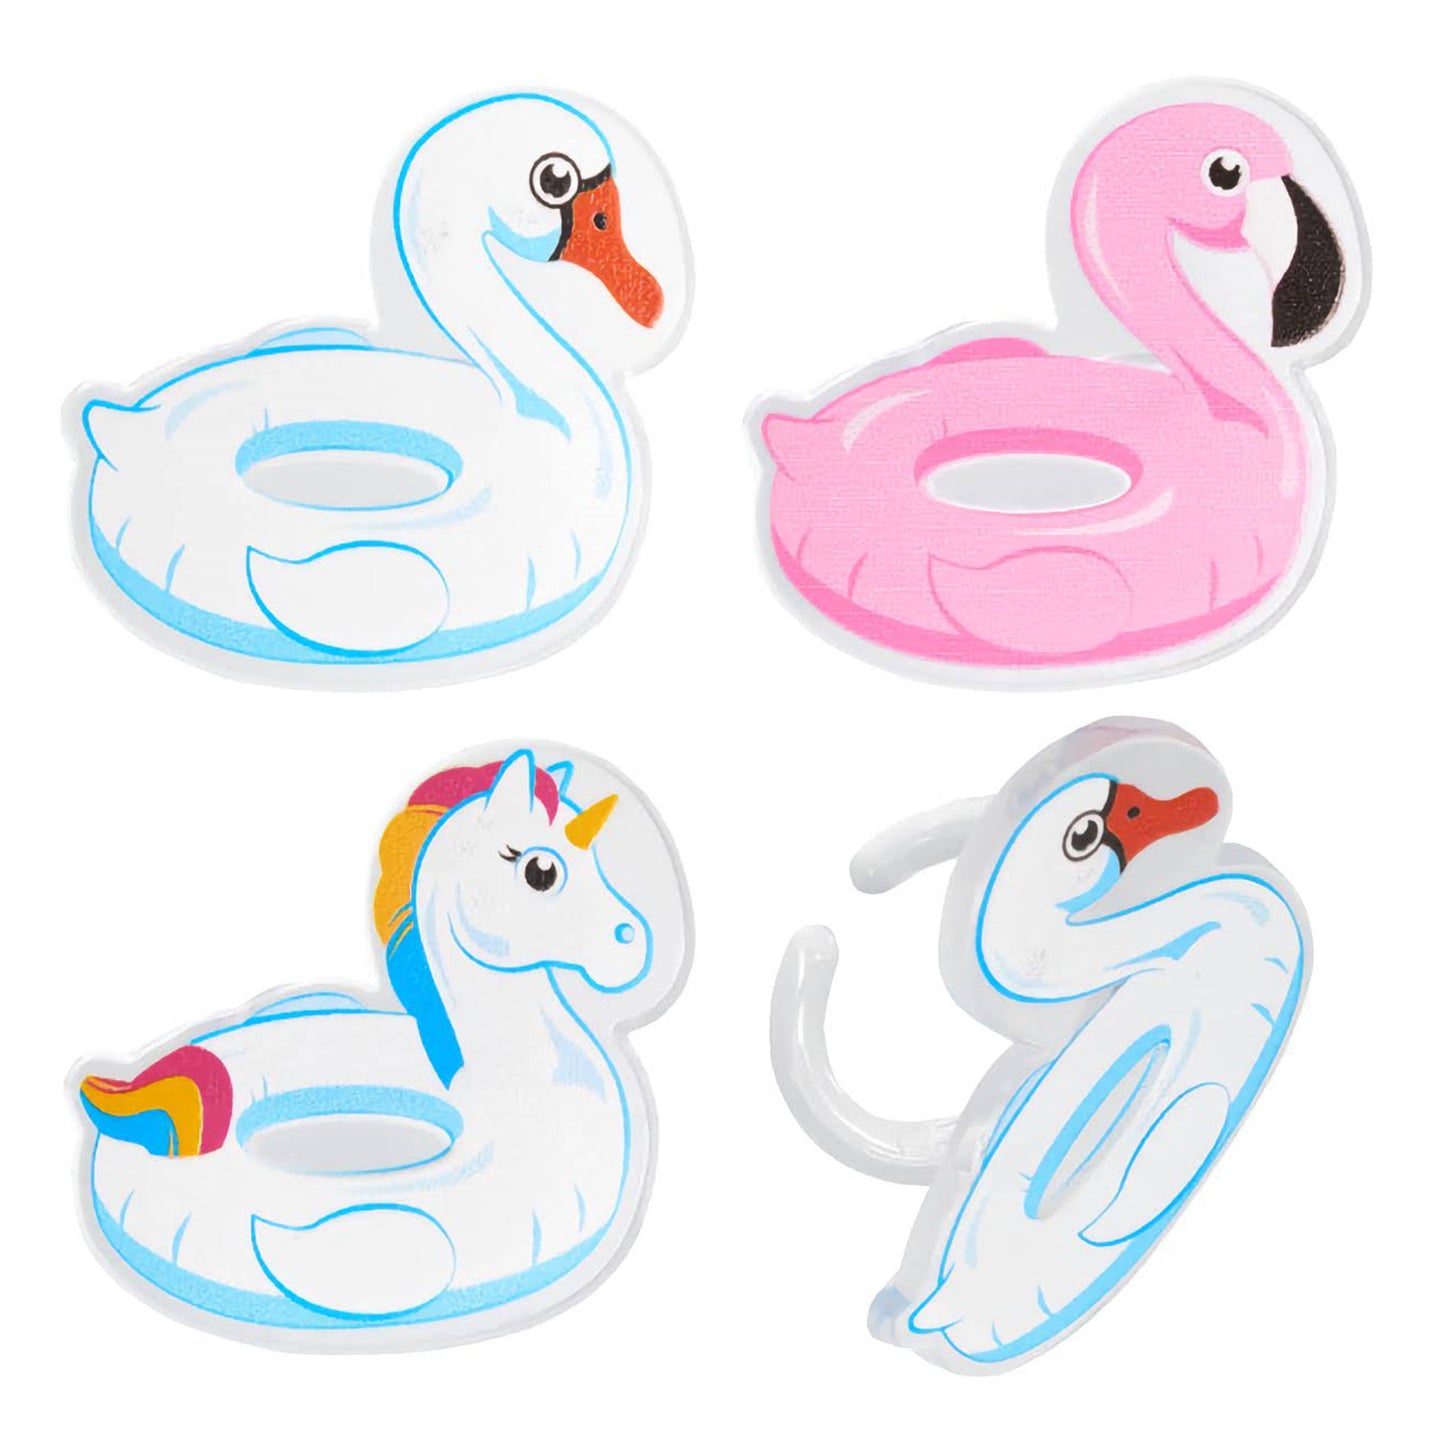 Assorted pool floaties cupcake topper rings, including swan and flamingo designs, perfect for pool party desserts or summertime baking fun.